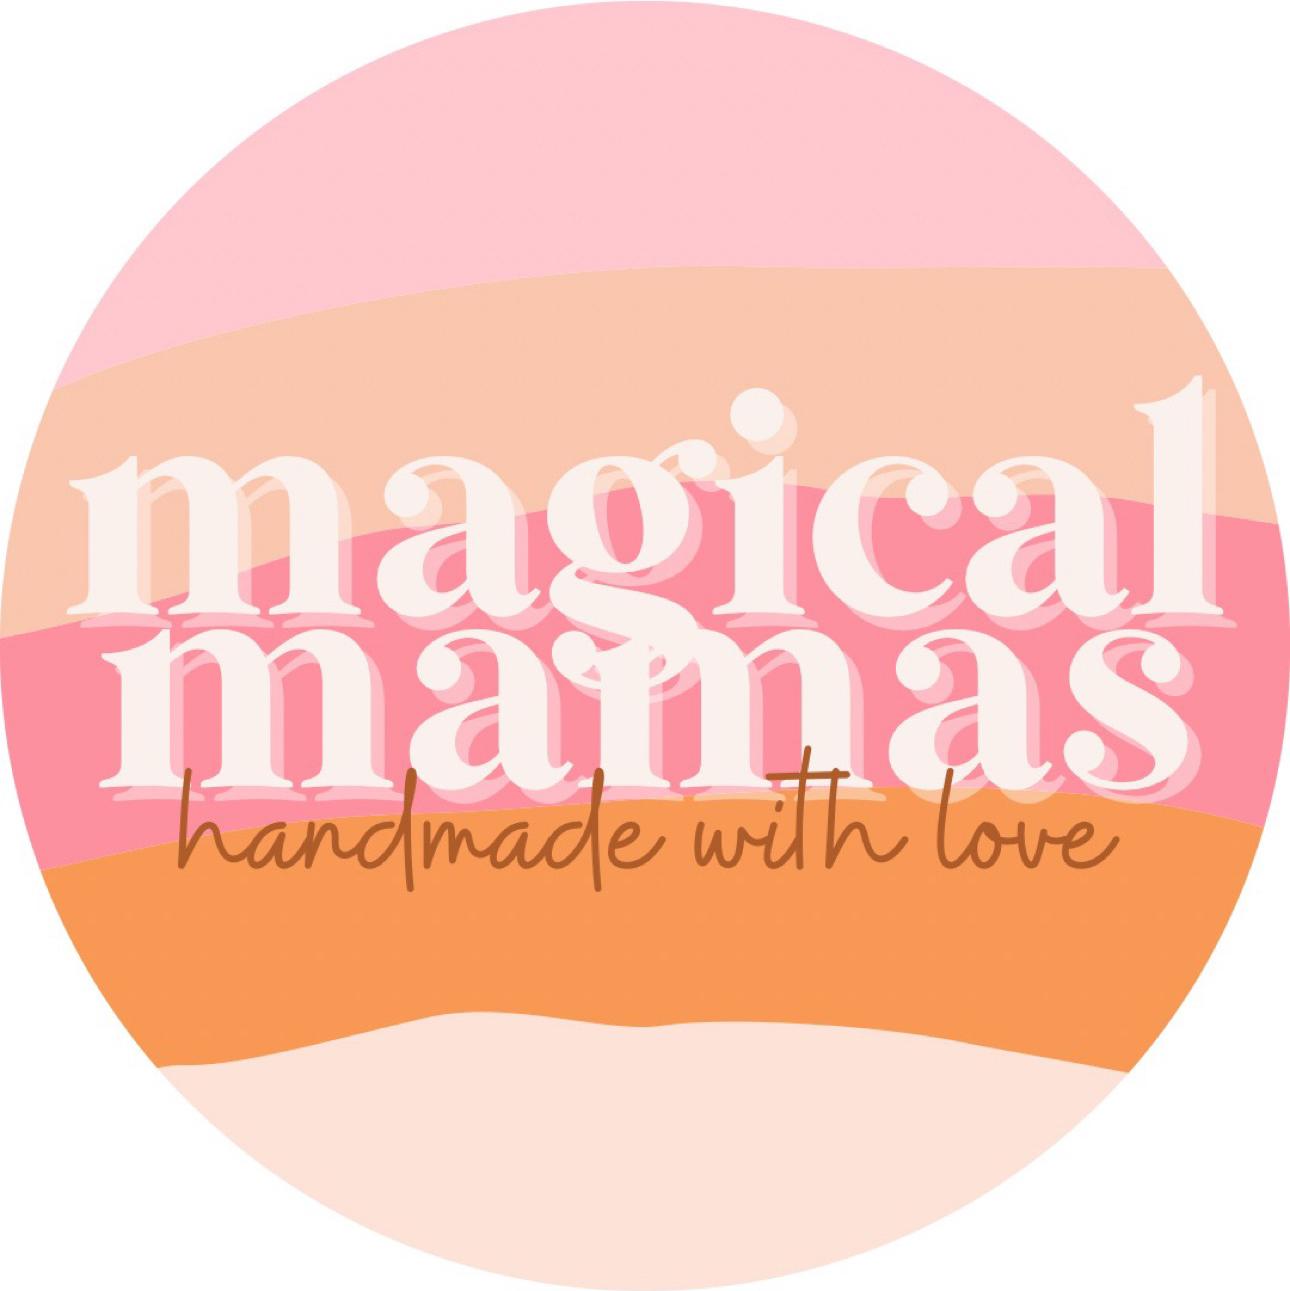 Magical Mamas 's images